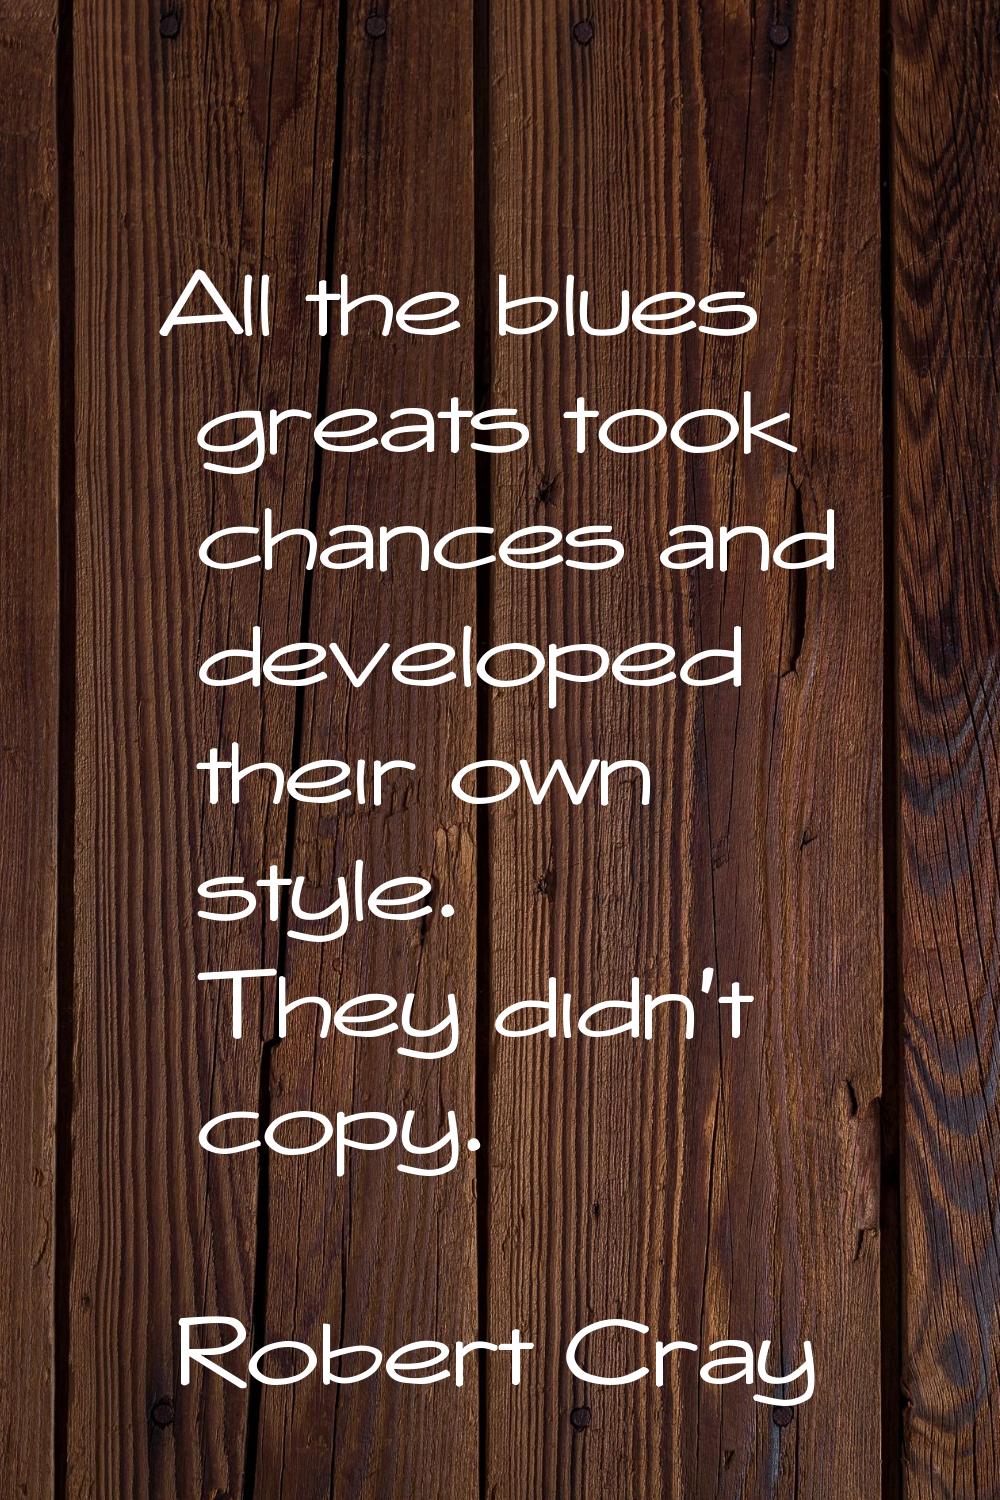 All the blues greats took chances and developed their own style. They didn't copy.